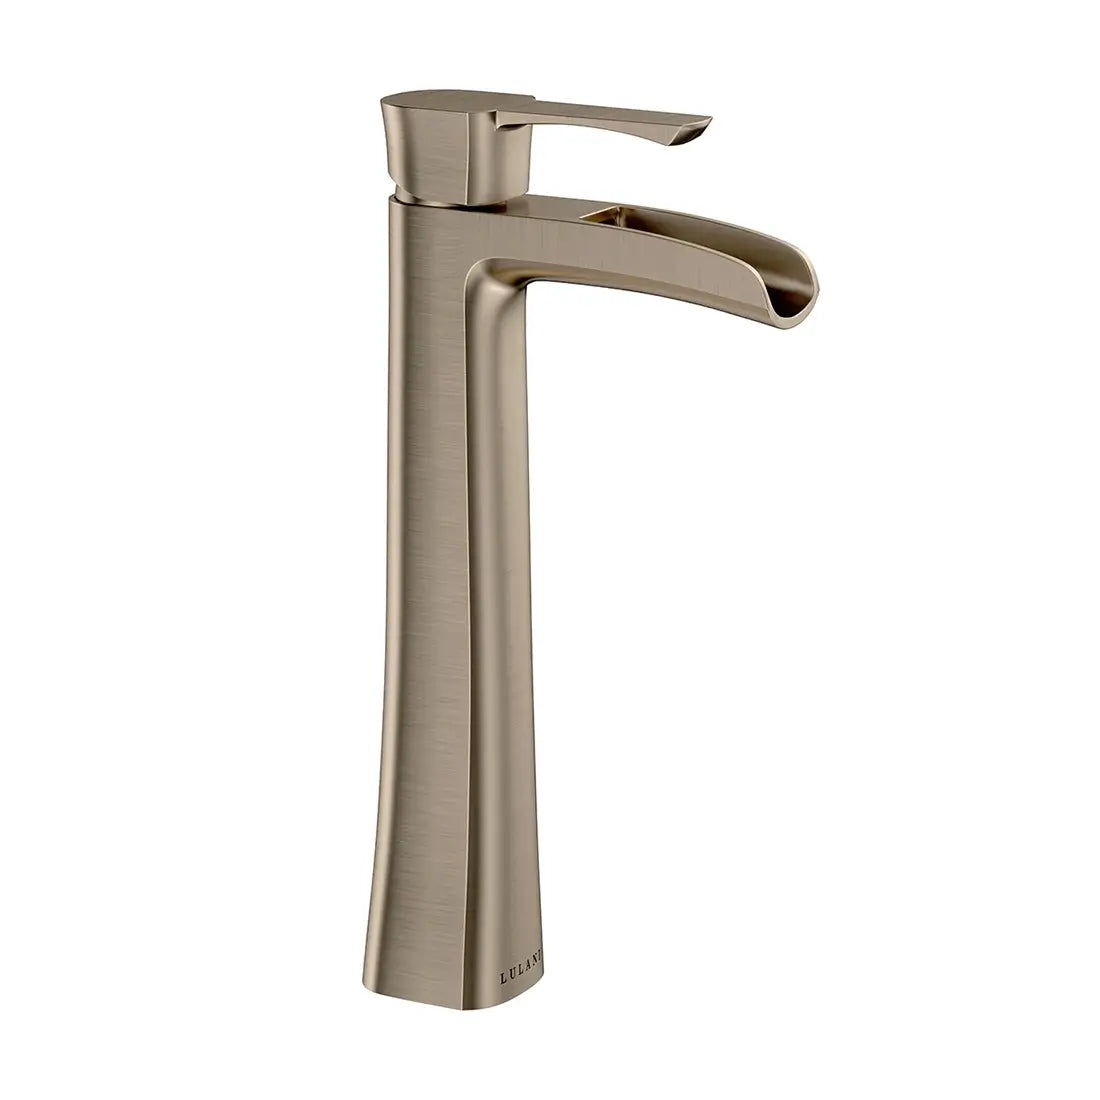 Barbados - Vessel Style Bathroom Faucet with drain assembly